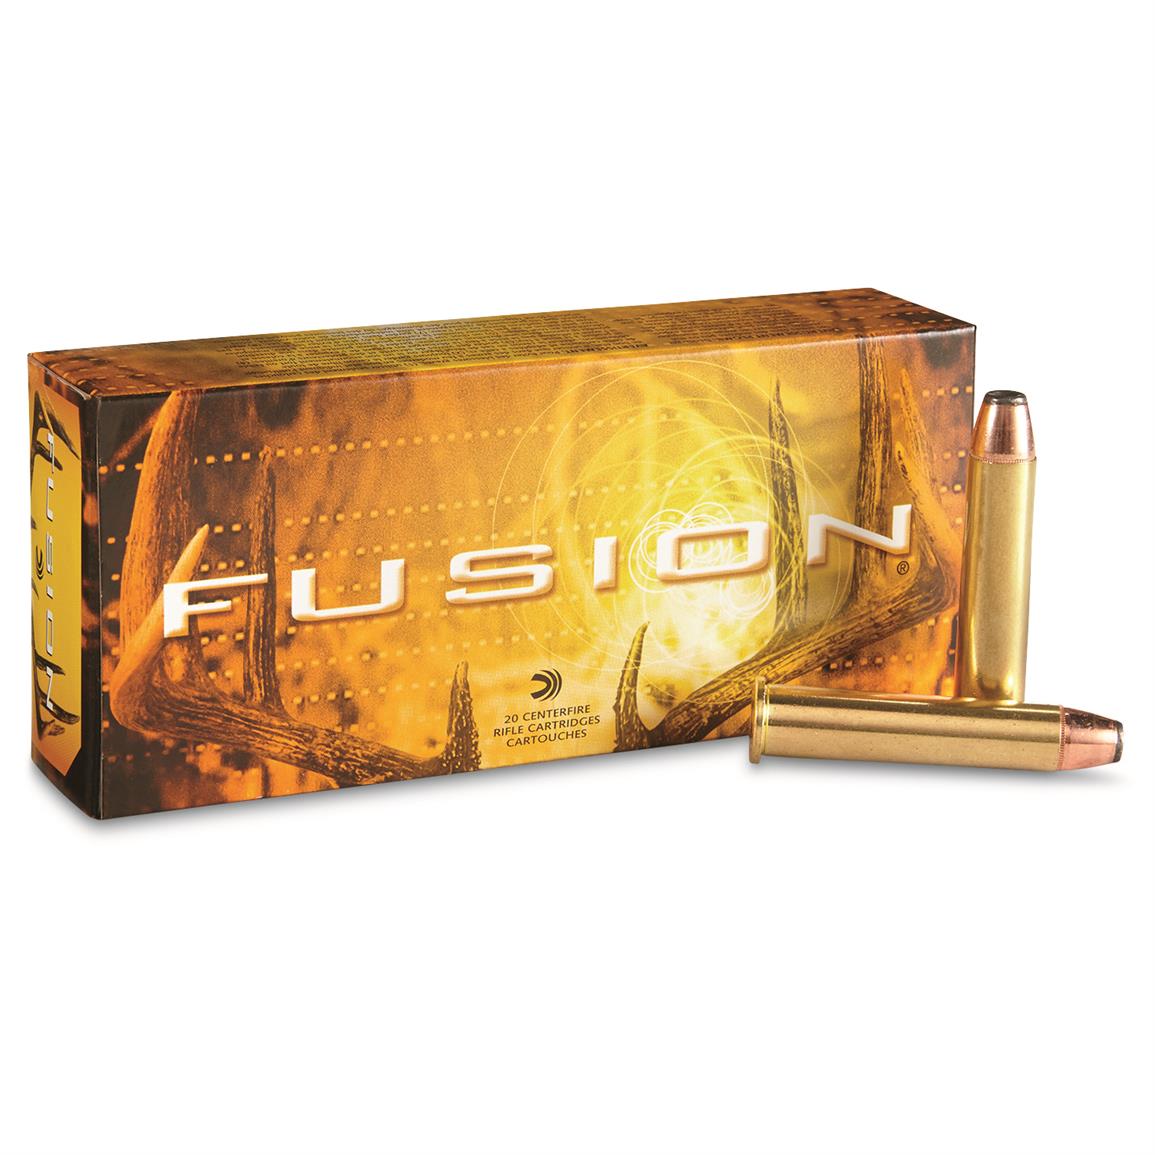 Federal Fusion, .45-70 Government, SP, 300 Grain, 20 Rounds